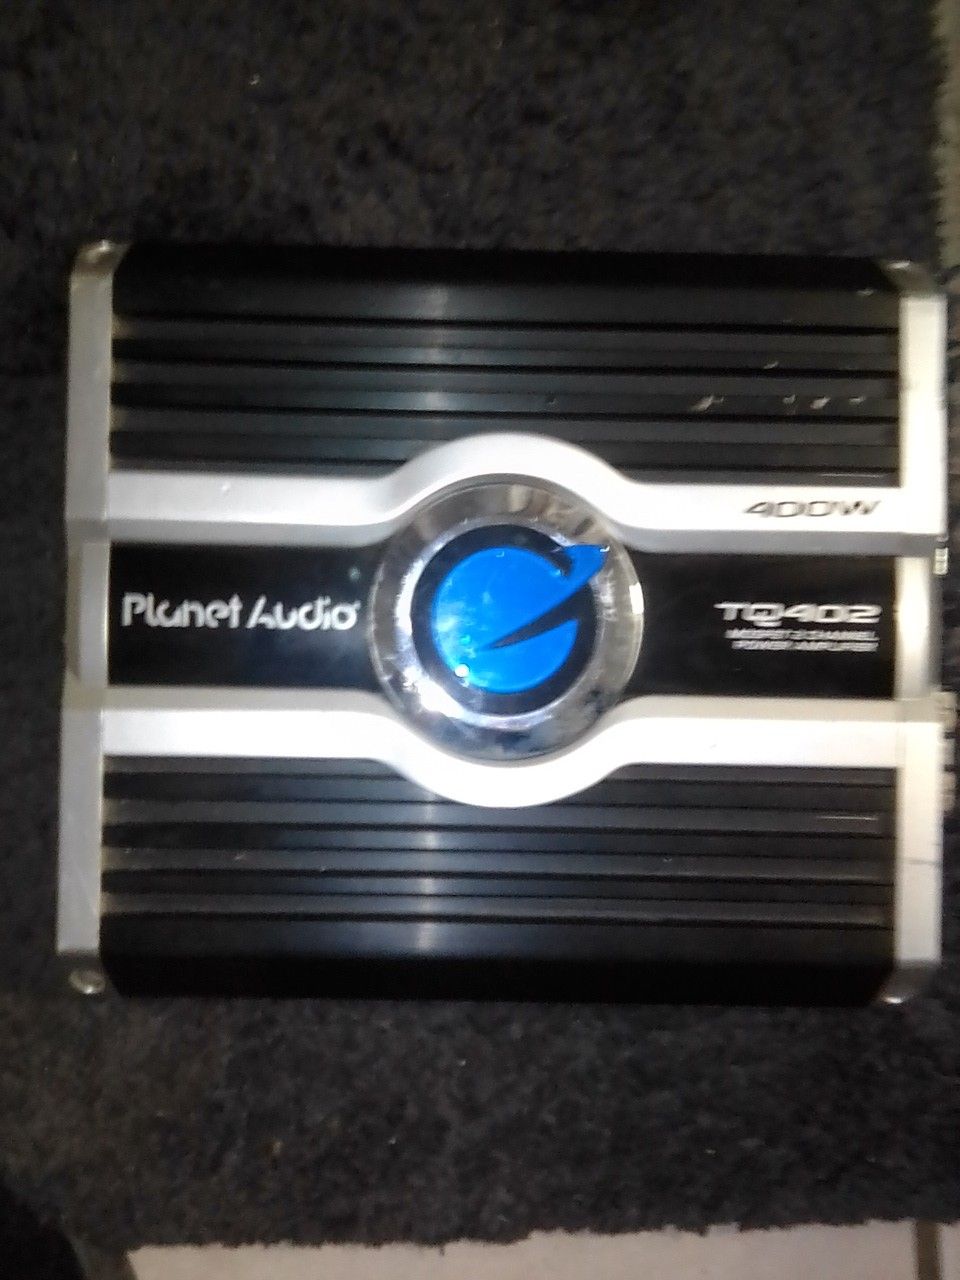 Car system amp. Name brand is planet audio 400w